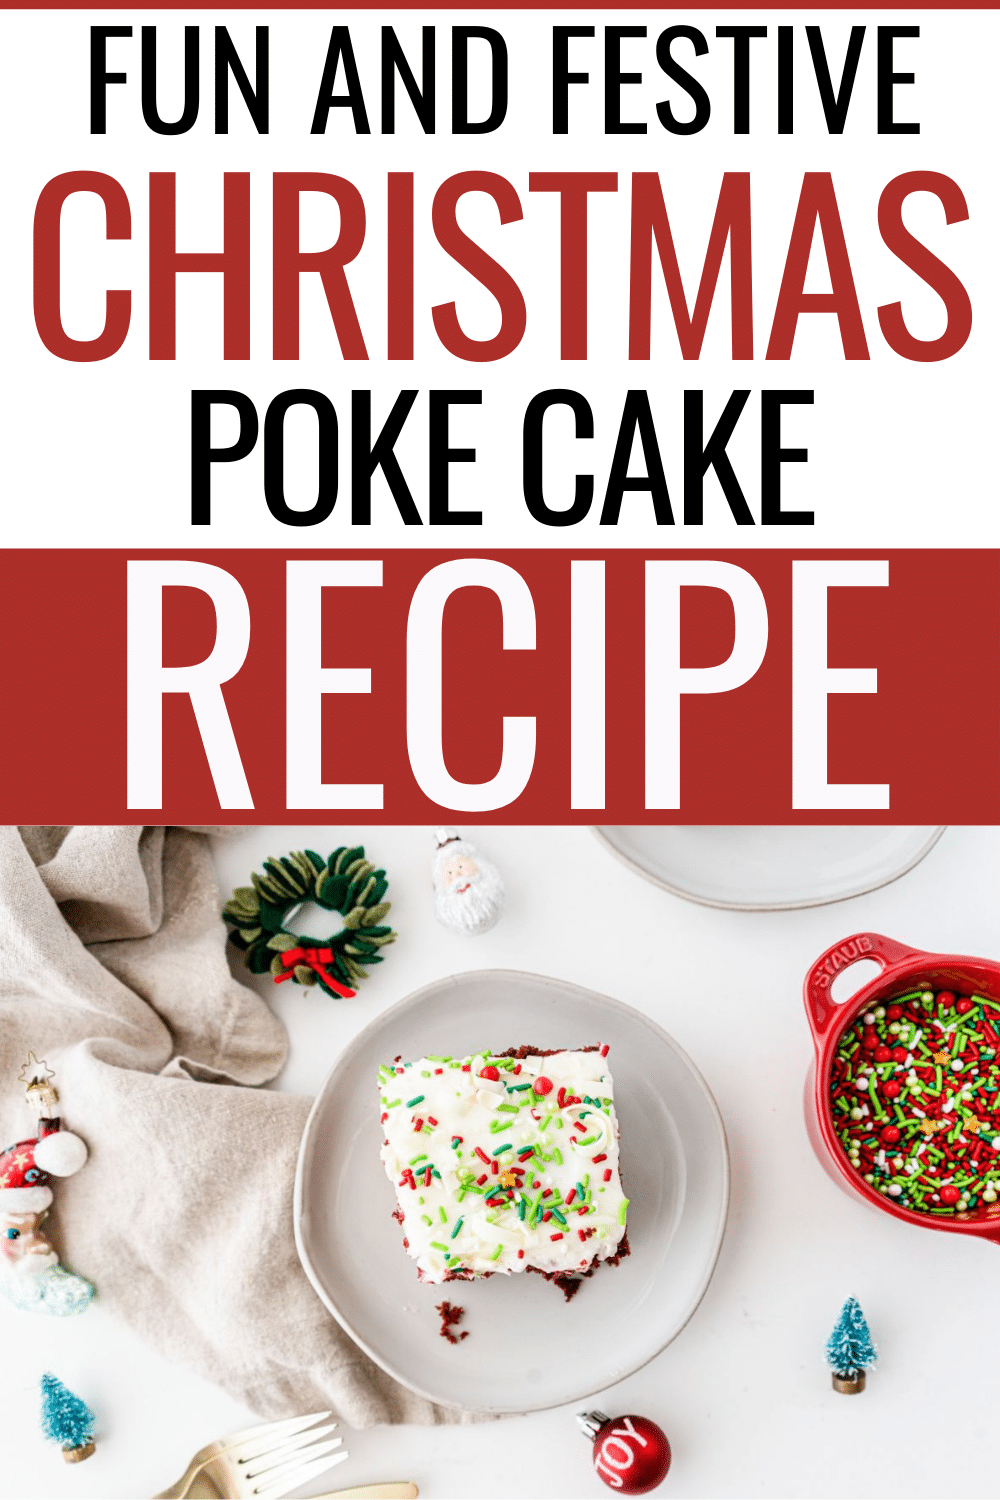 Christmas Poke Cake is so easy to make and makes for a festive dessert. If you love easy Christmas recipes then this is the recipe for you. #christmas #pokecake #cake #dessert #recipe via @wondermomwannab